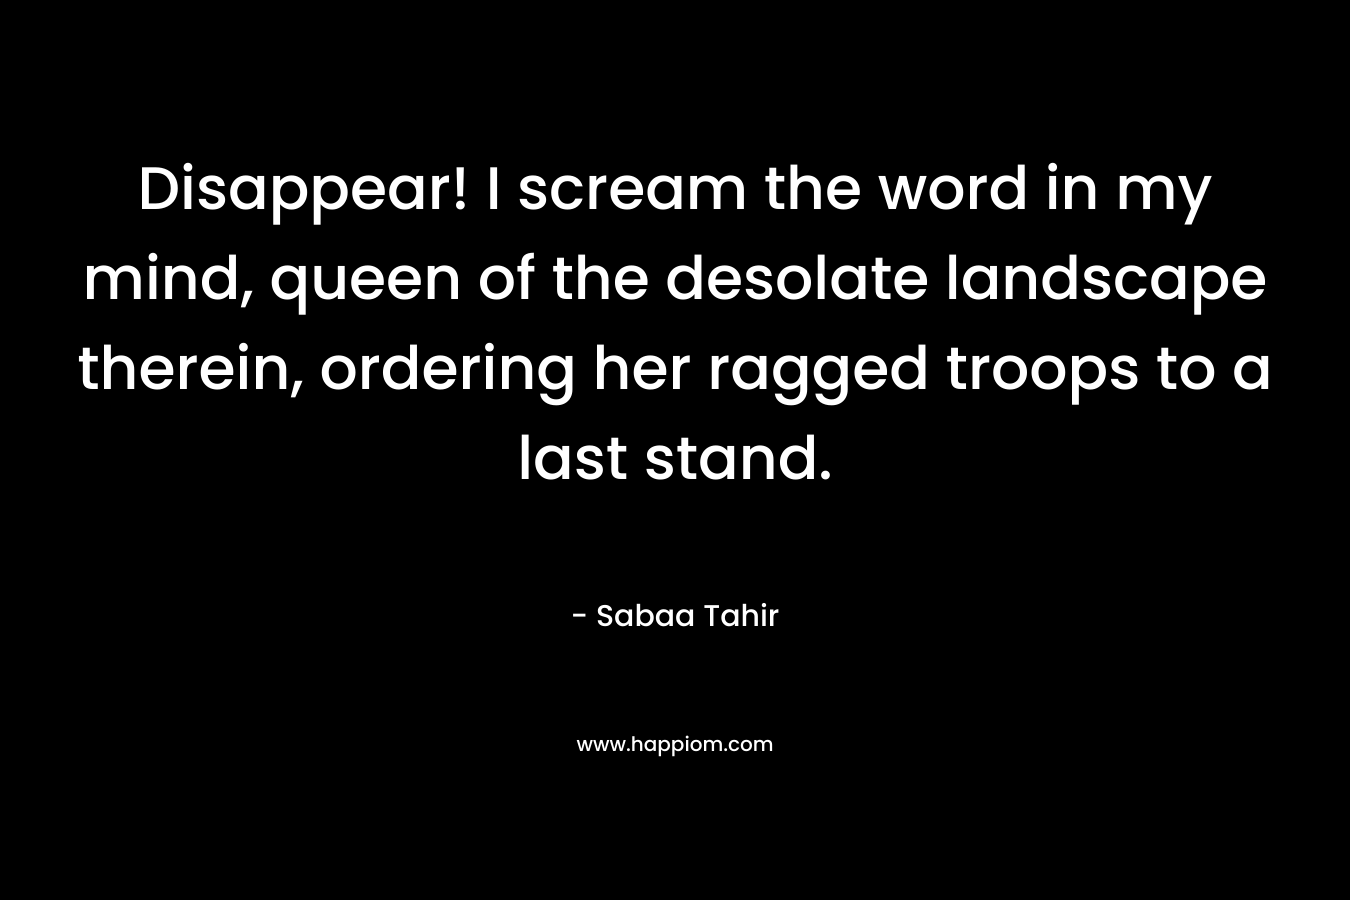 Disappear! I scream the word in my mind, queen of the desolate landscape therein, ordering her ragged troops to a last stand. – Sabaa Tahir